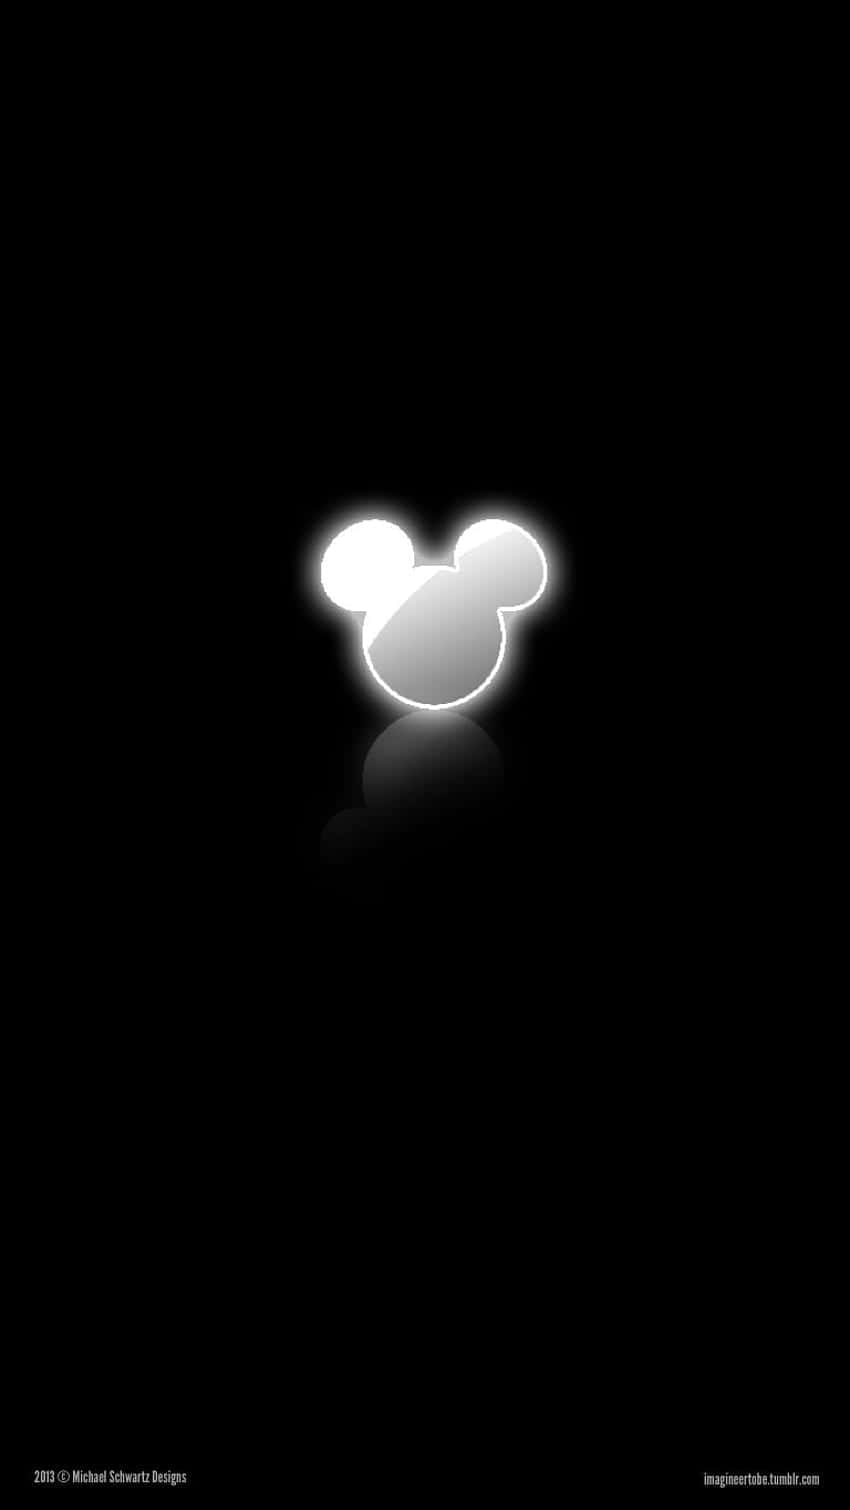 A Mickey Mouse Logo On A Black Background Wallpaper